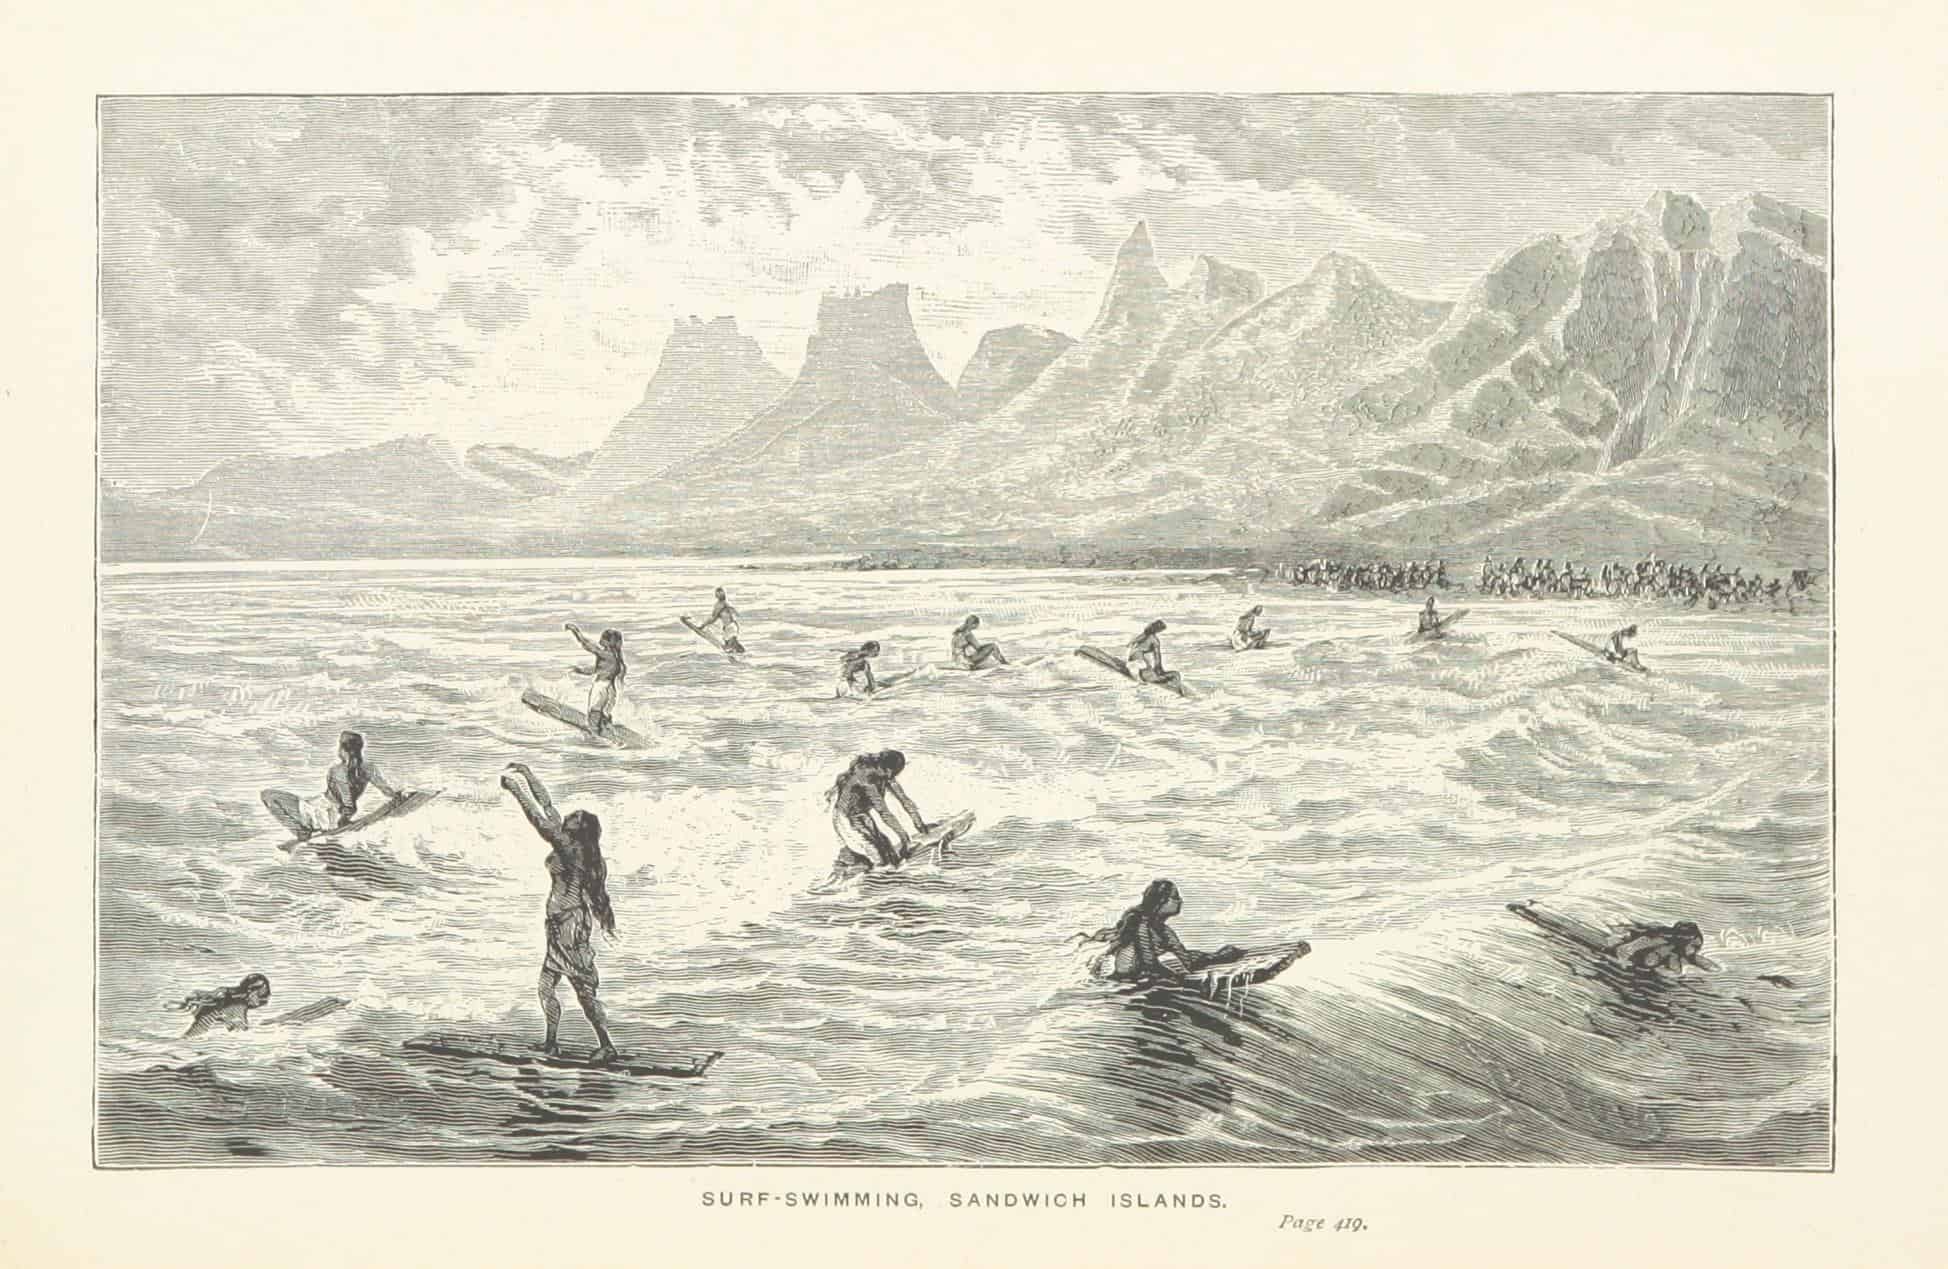 pencil drawing entitled surf-swimming Sandwich Islands showing 14 women surfers from from the 1800s catching waves while a large crowd watches from shore in Hawaii